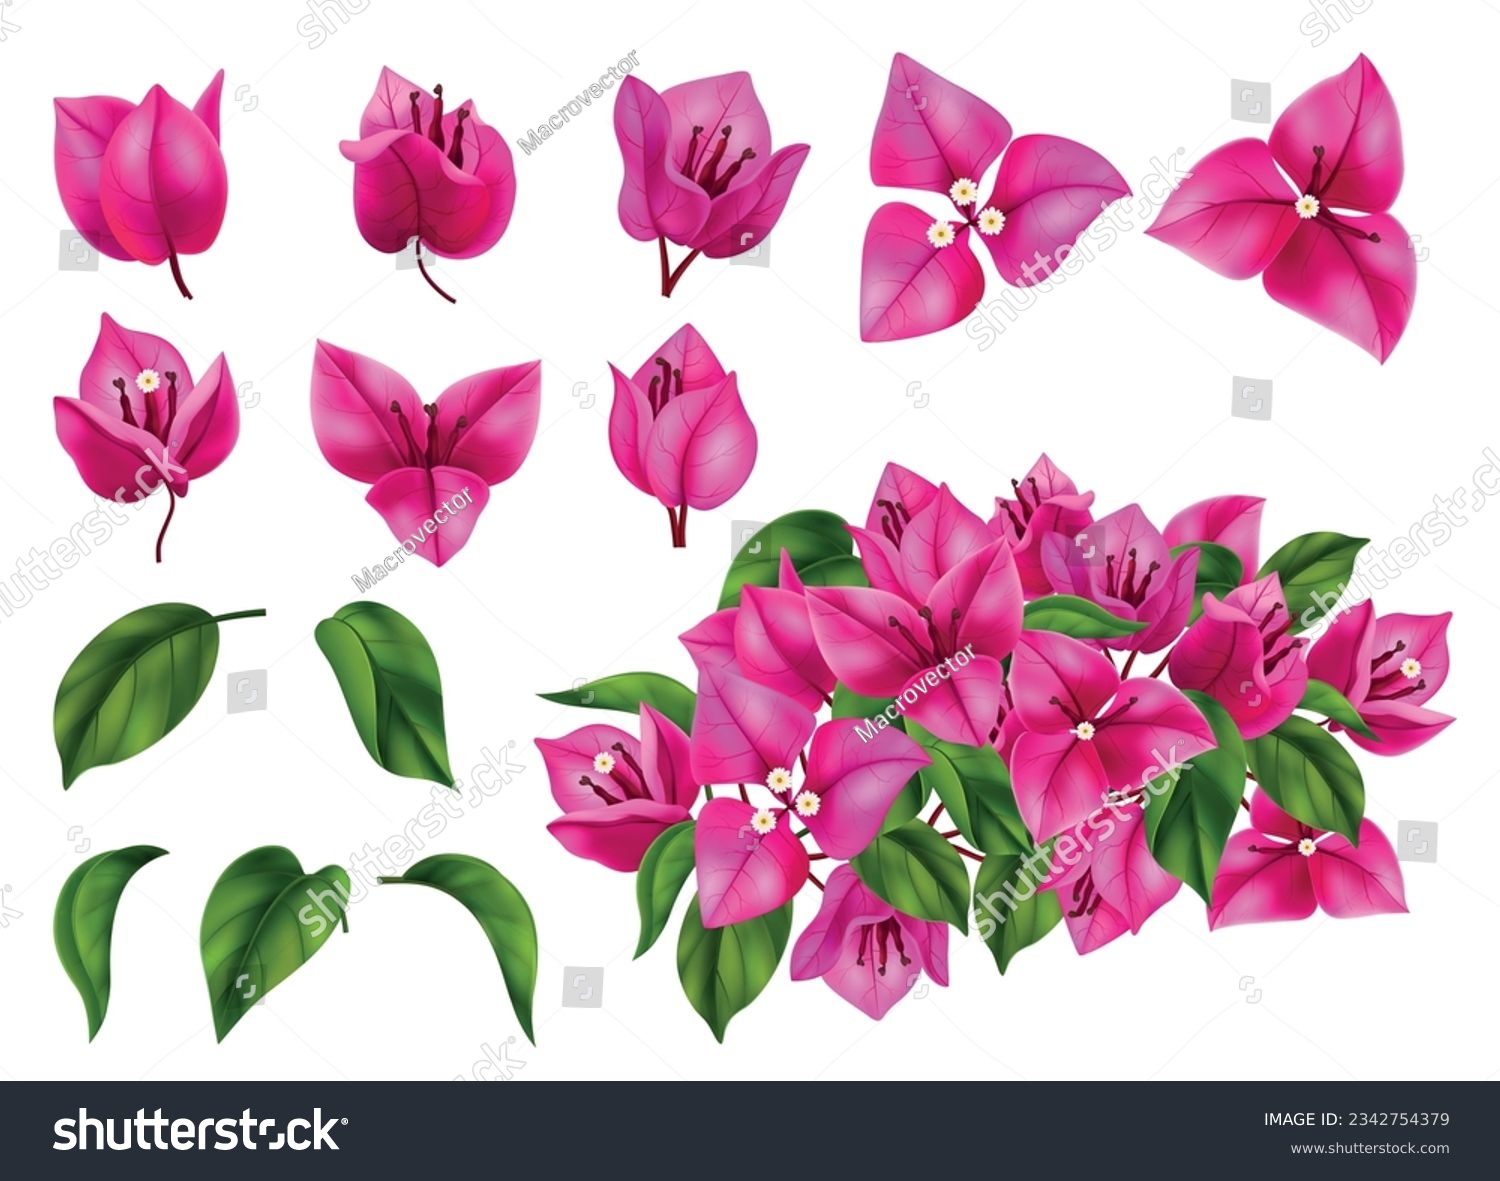 SVG of Bougainvillea flowers leaves and branches realistic set isolated at white background vector illustration svg